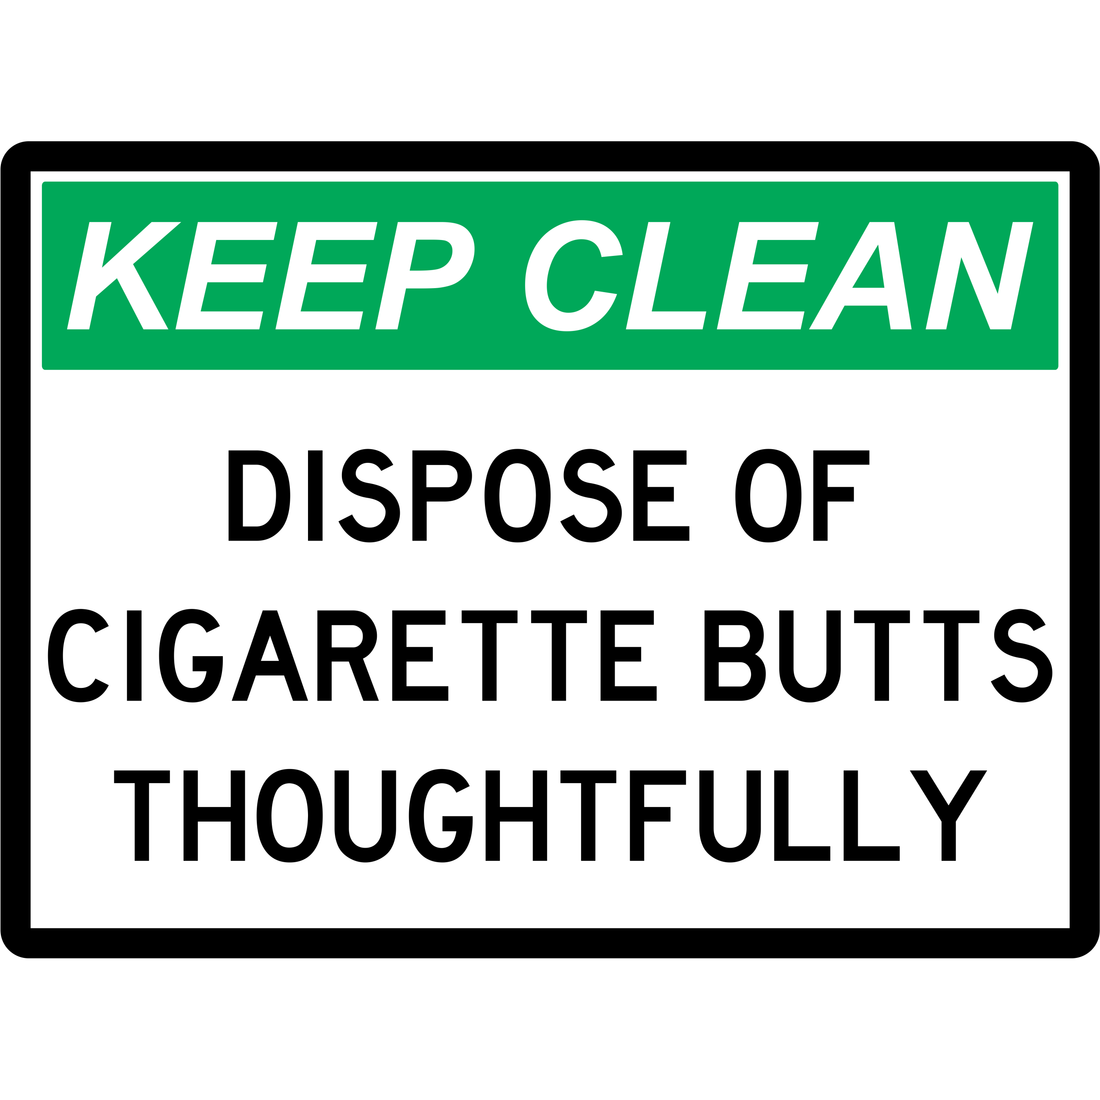 GENERAL - DISPOSE OF CIGARETTE BUTTS THOUGHTFULLY